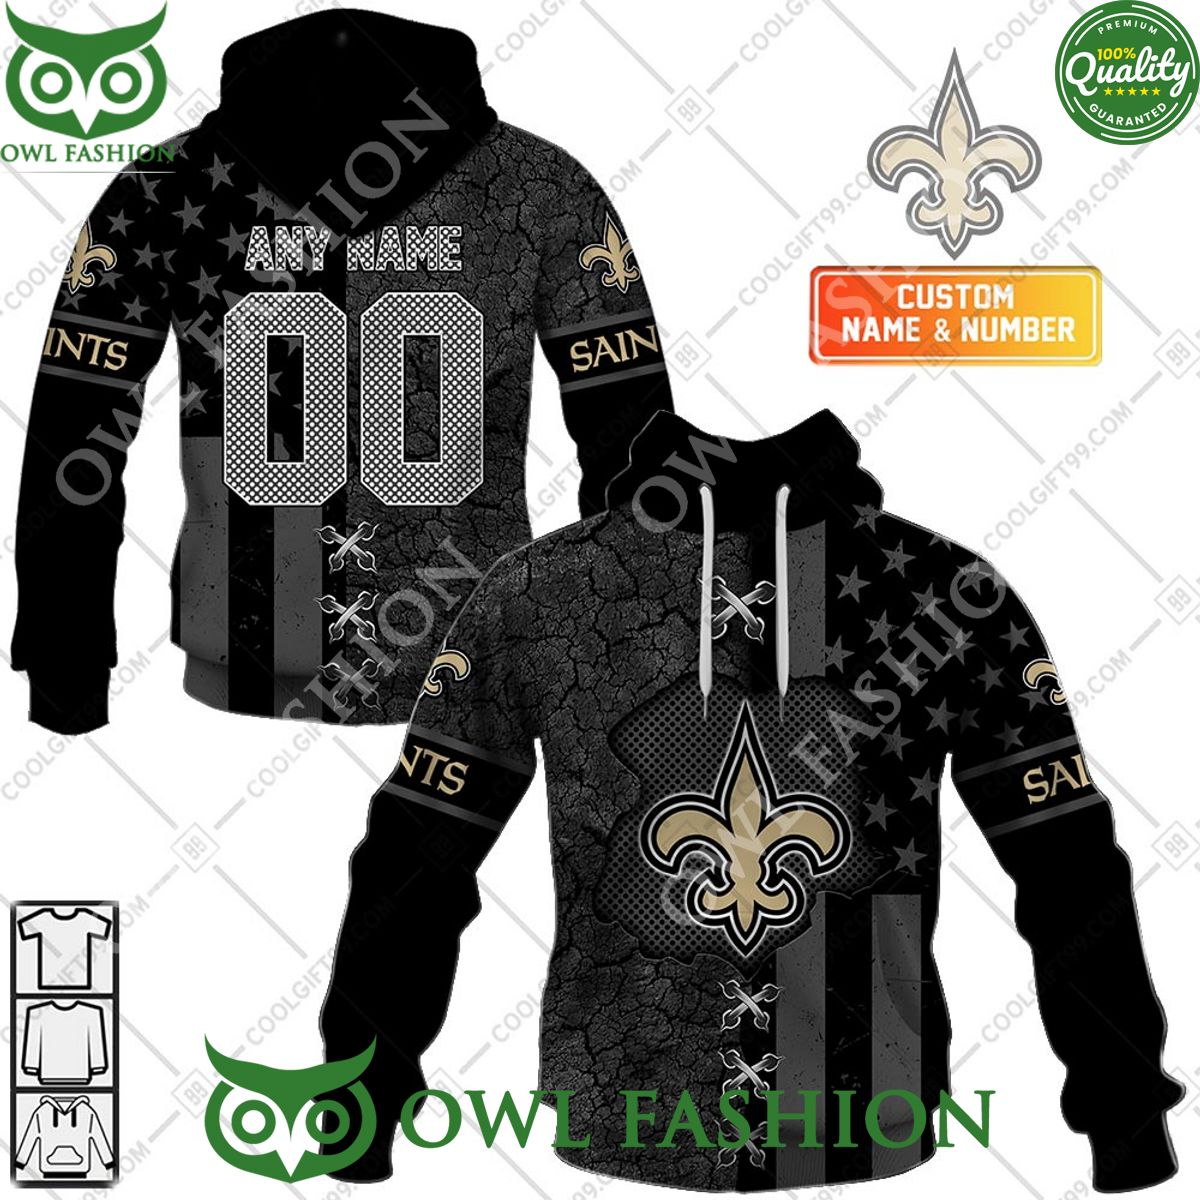 Personalized New Orleans Saints NFL USA Flag Broken Mix Hoodie shirt